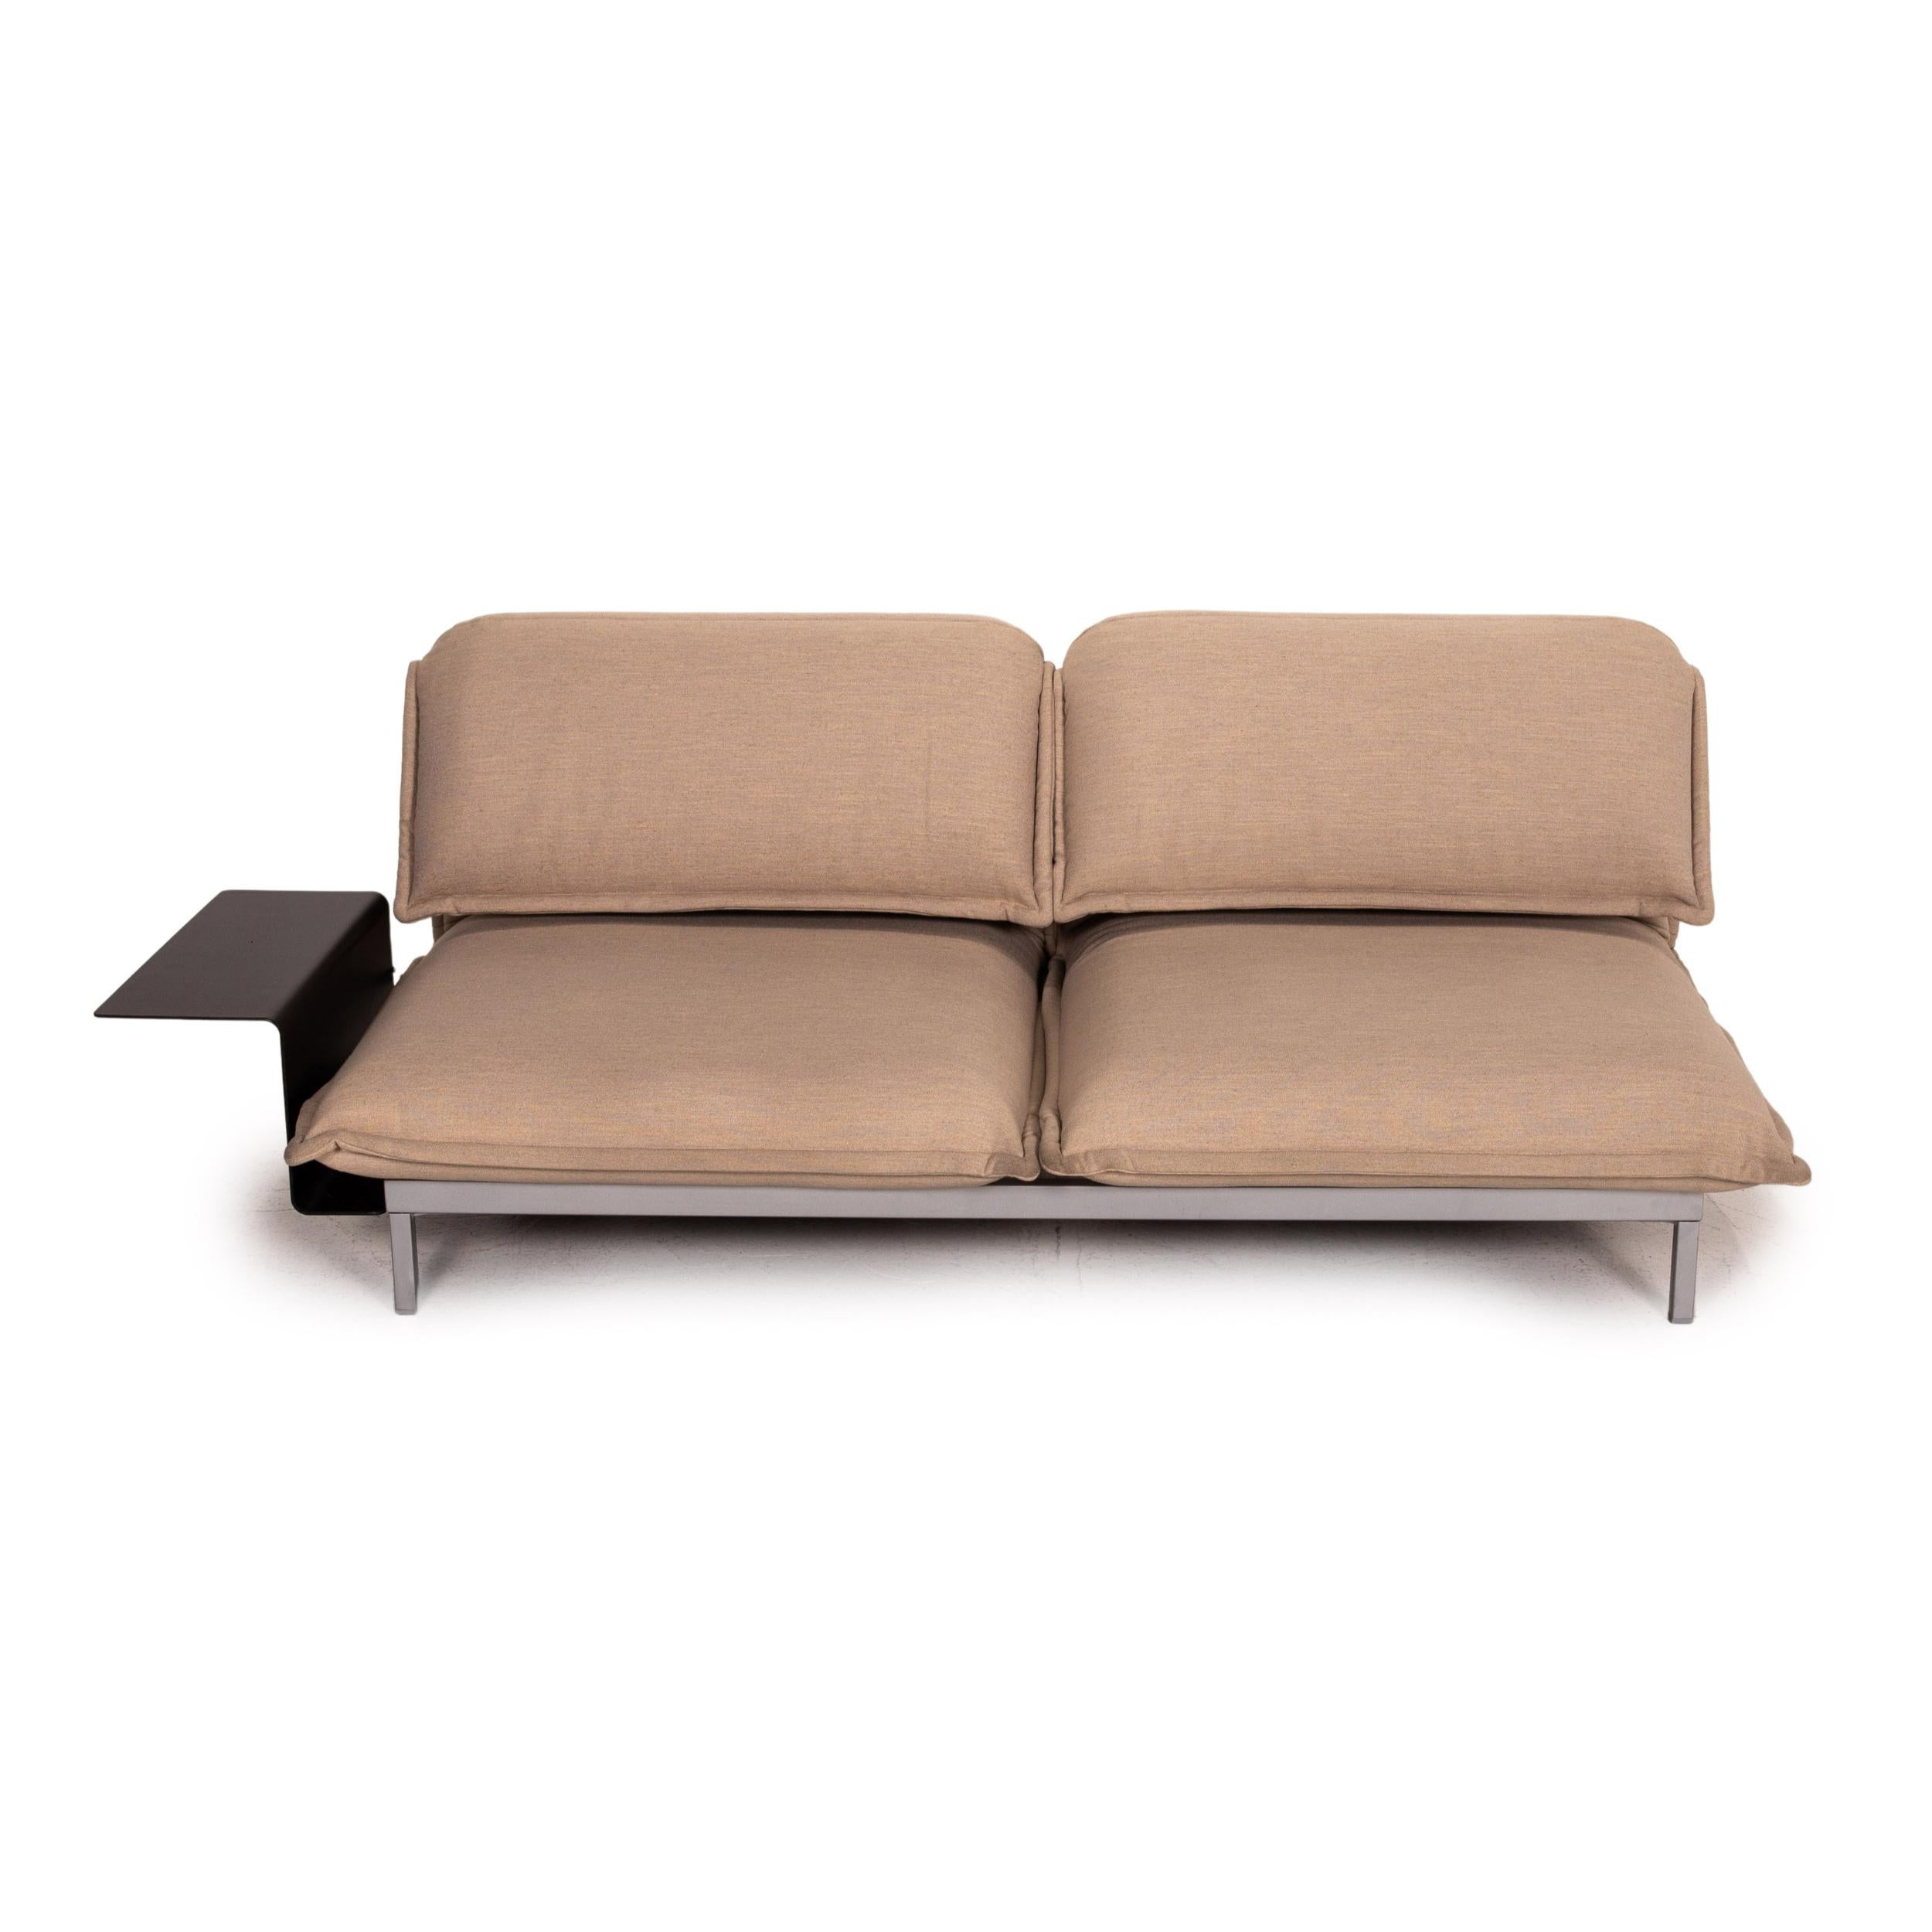 Contemporary Rolf Benz Nova Fabric Sofa Beige Sleeping Function Relaxation Function Sofa Bed